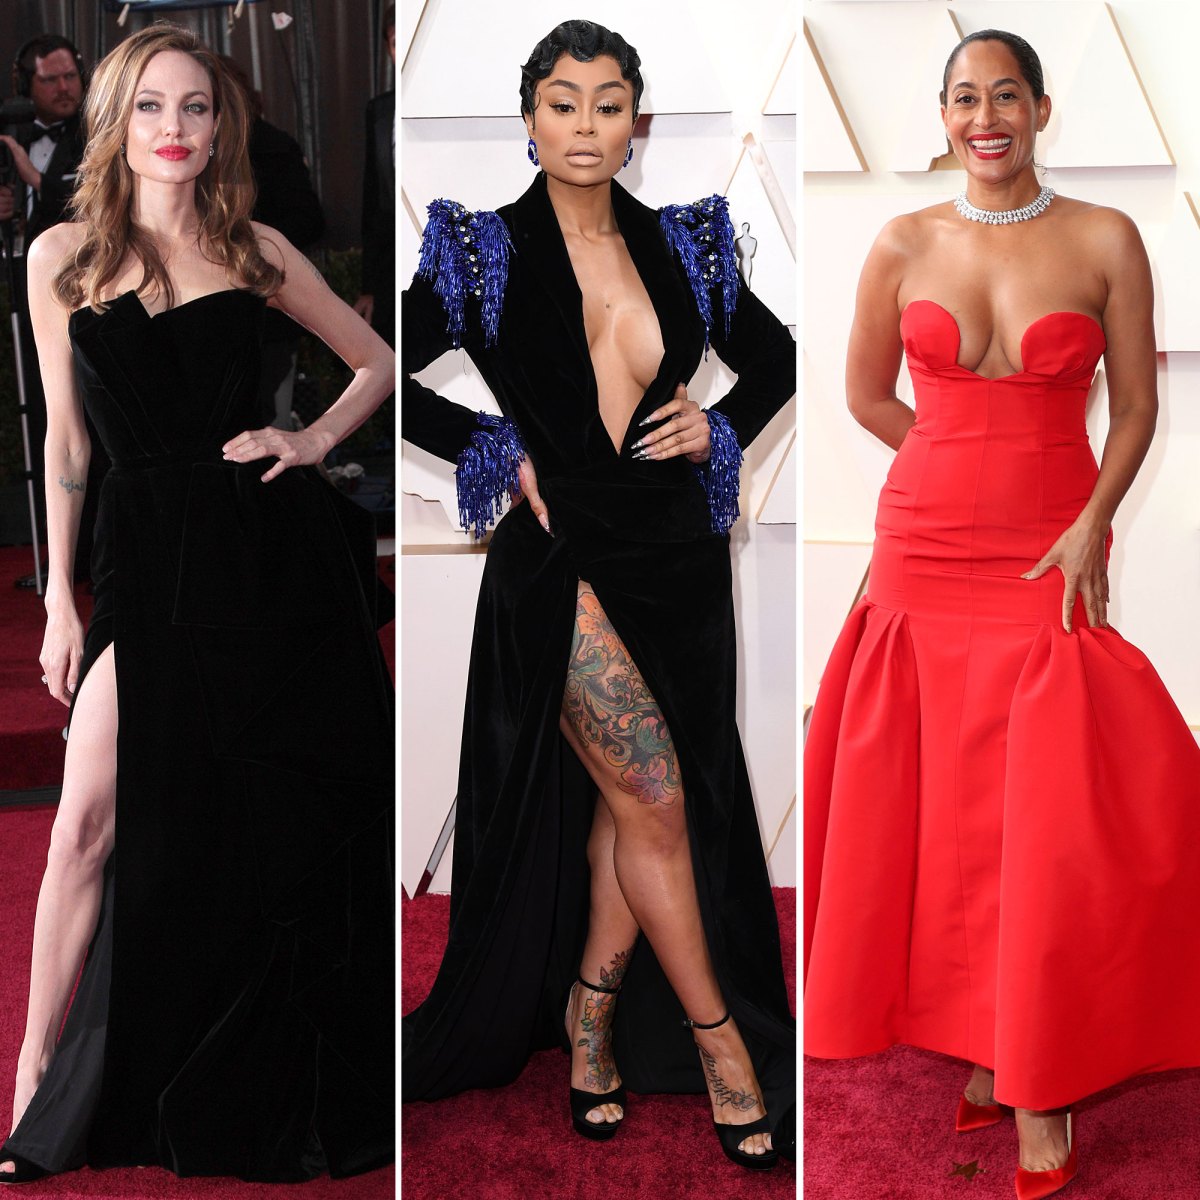 Best Oscars Dresses of All Time - Most Iconic Oscar Red Carpet Gowns